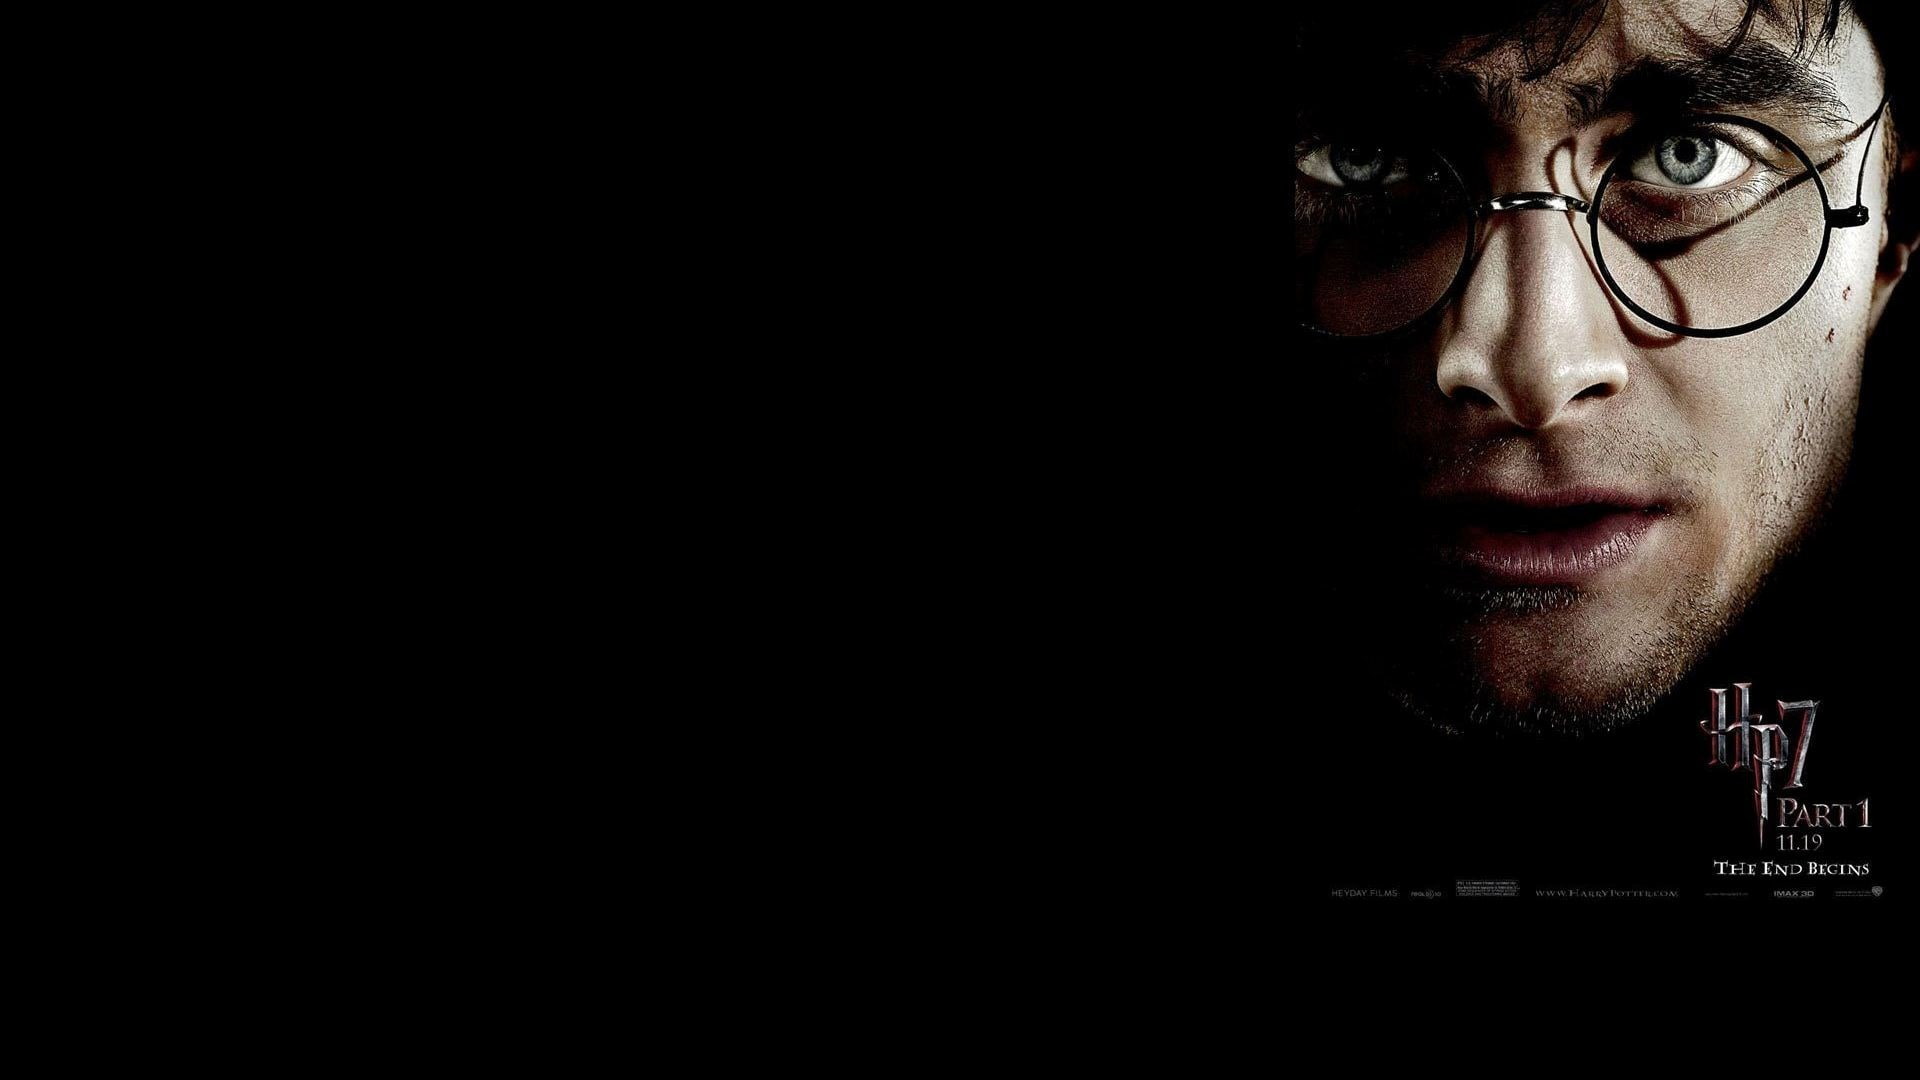 harry potter and the deathly hallows part 1, portrait, eyeglasses